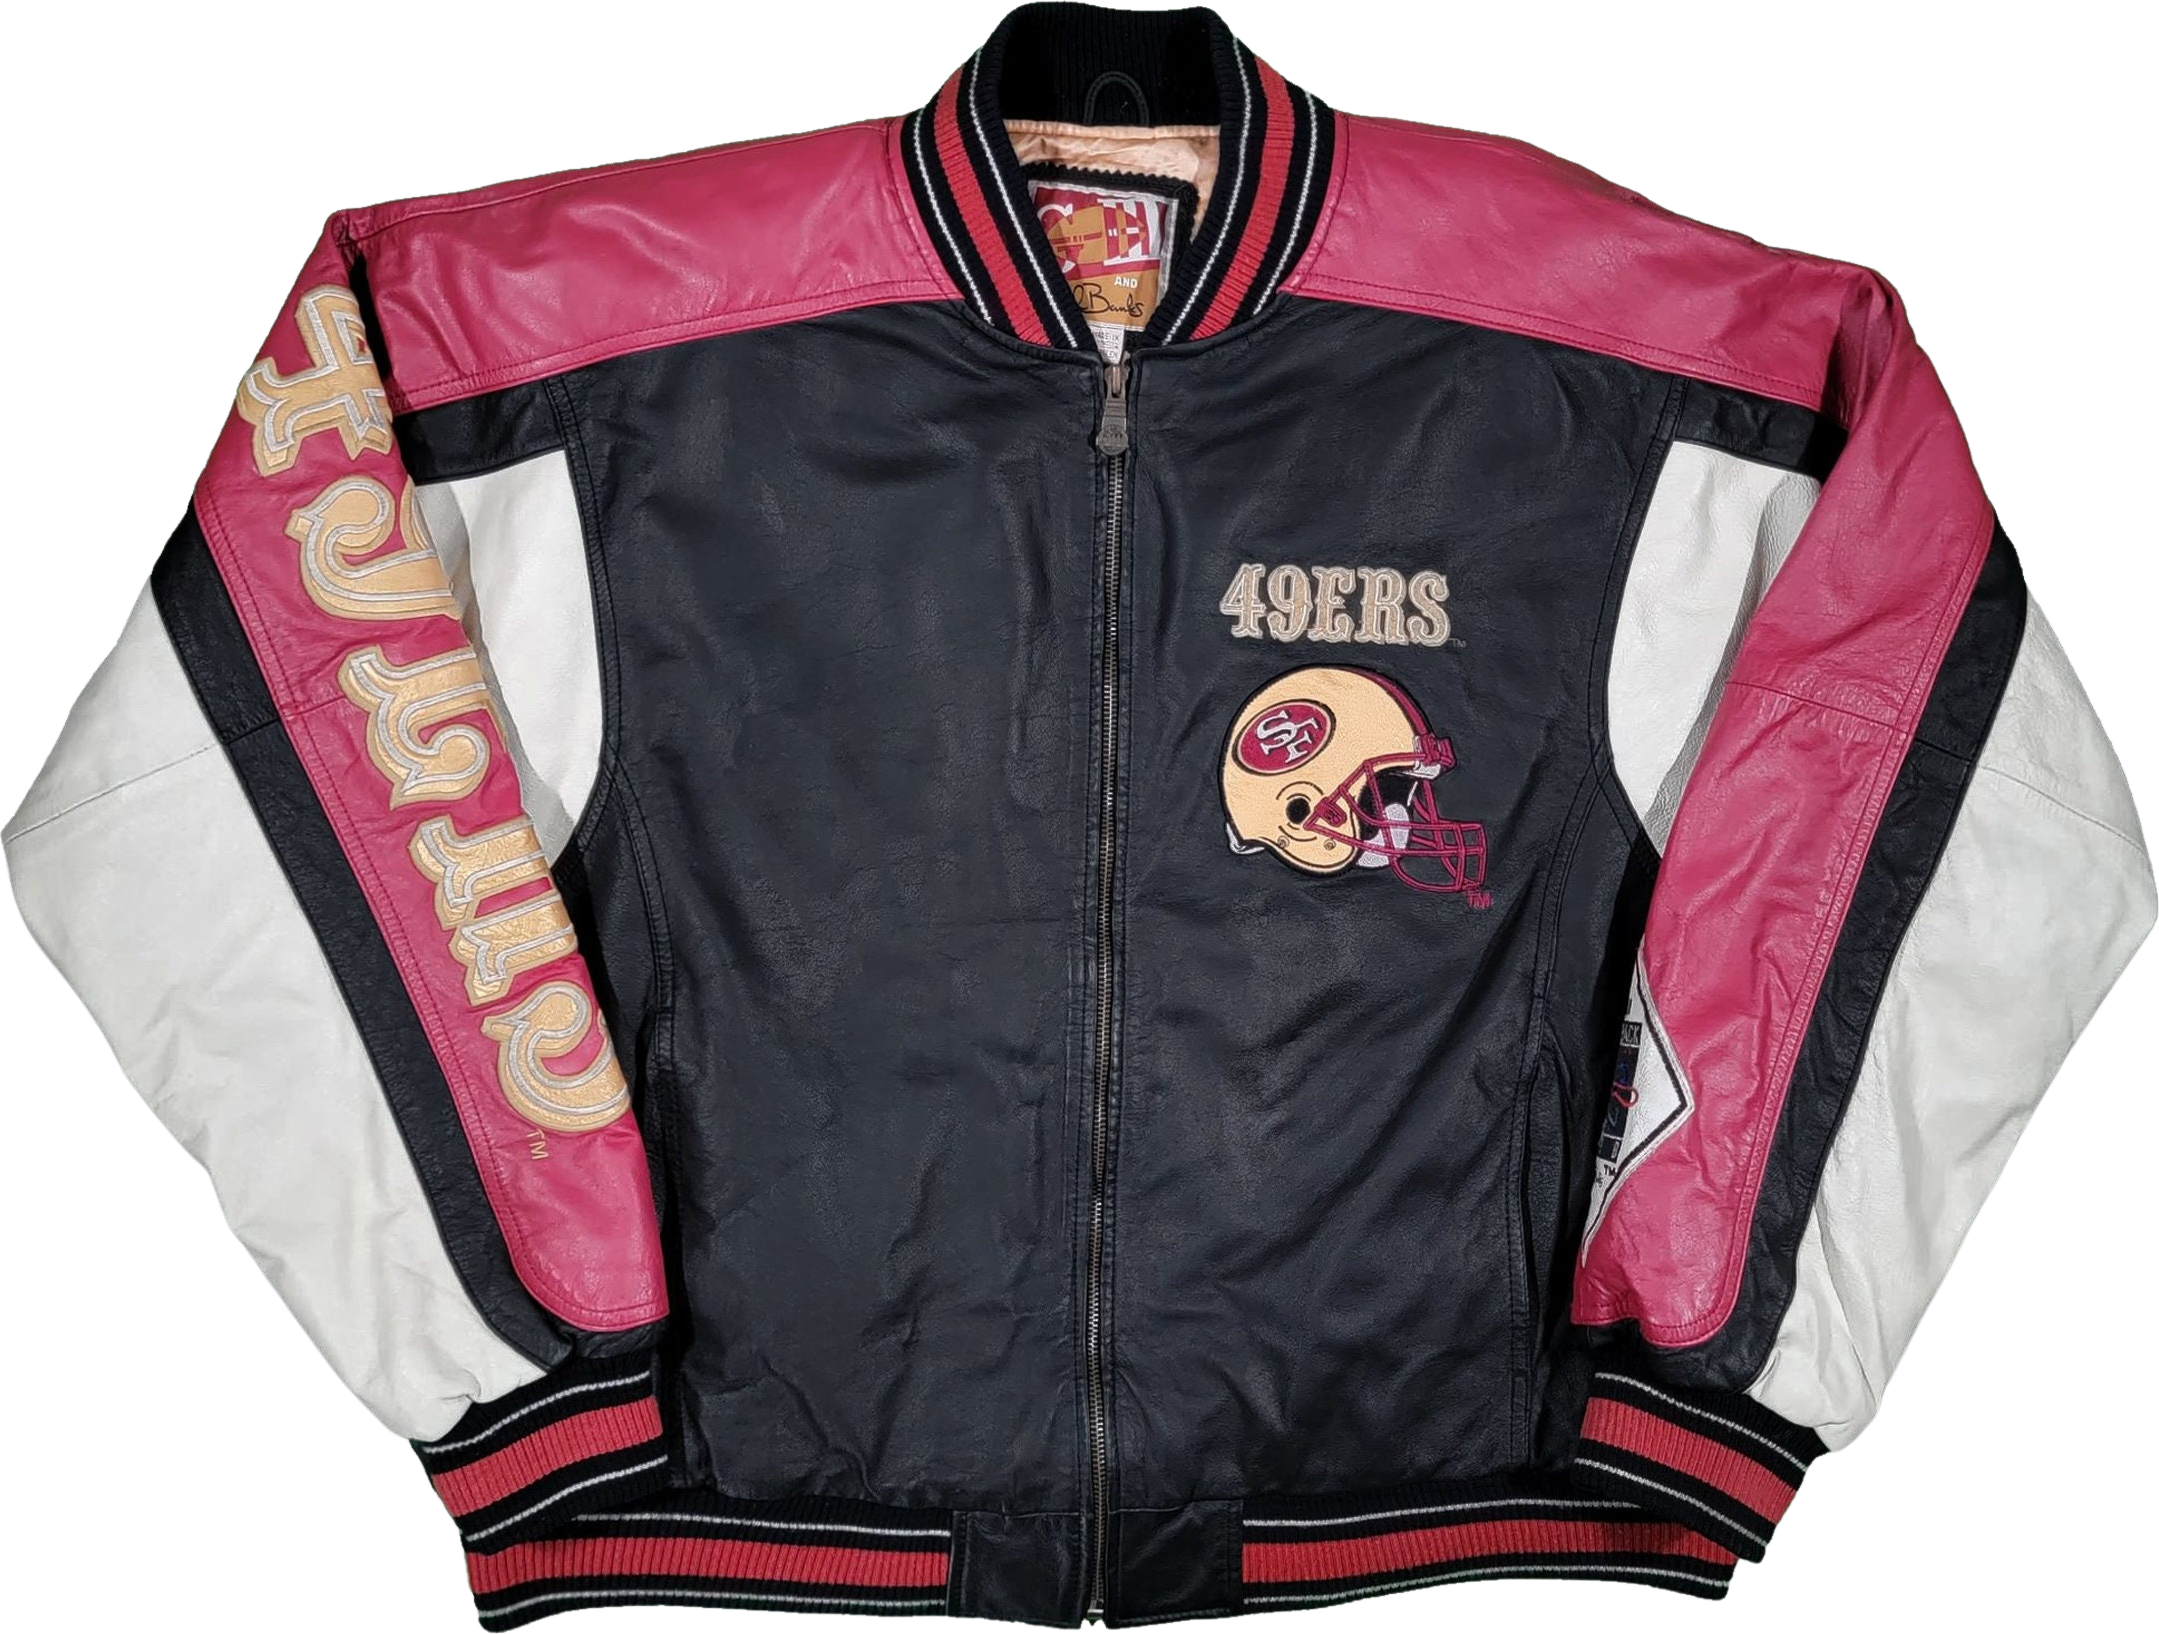 S.F49ers leather jacket, size sm, Carl Banks, red,w& b w/ gold letters L-J4